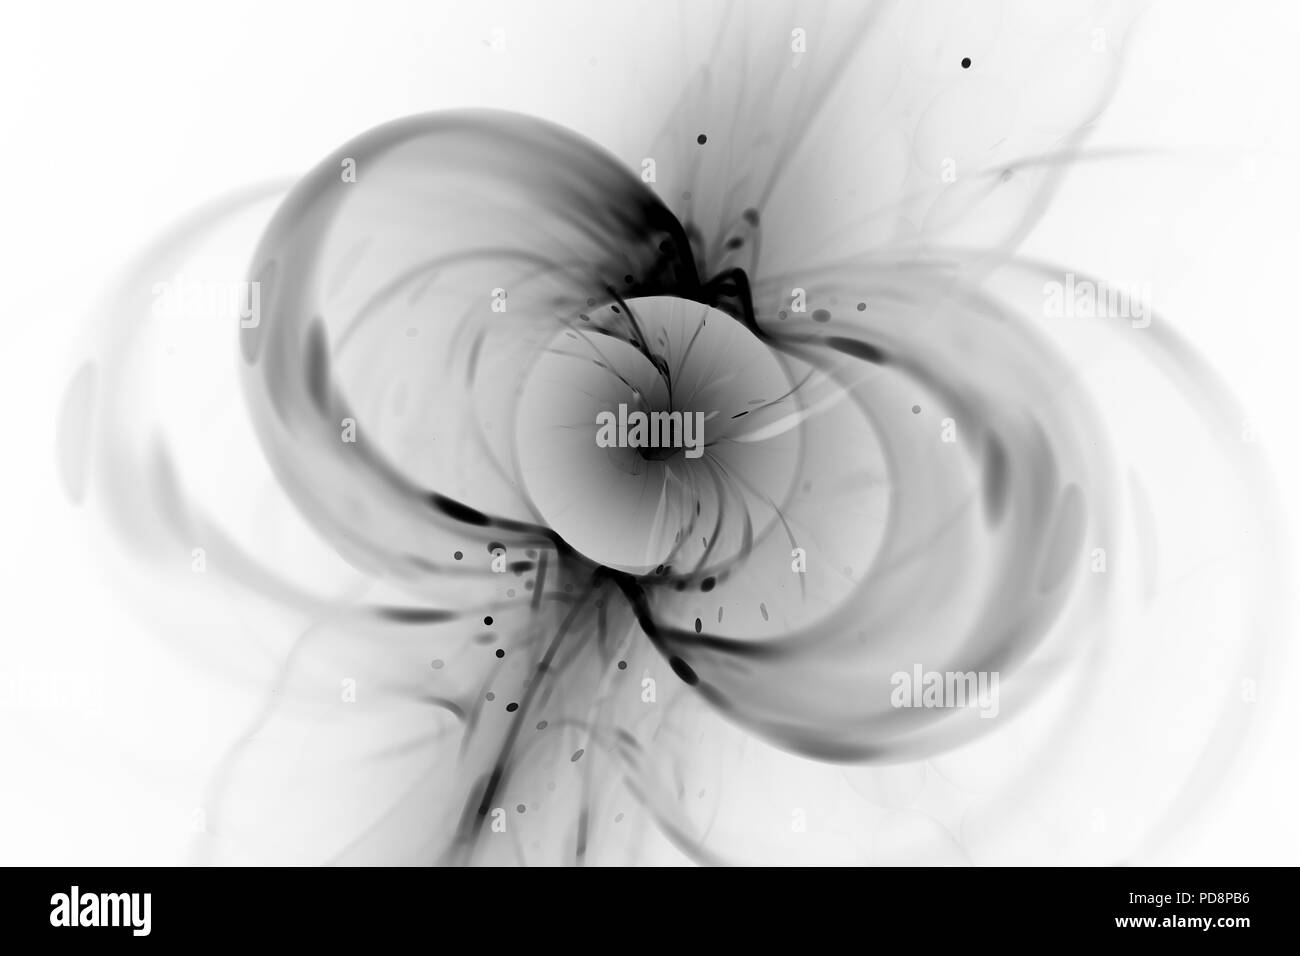 Glowing spinning neutron star inverted black and white effect, computer generated abstract background, 3D rendering Stock Photo